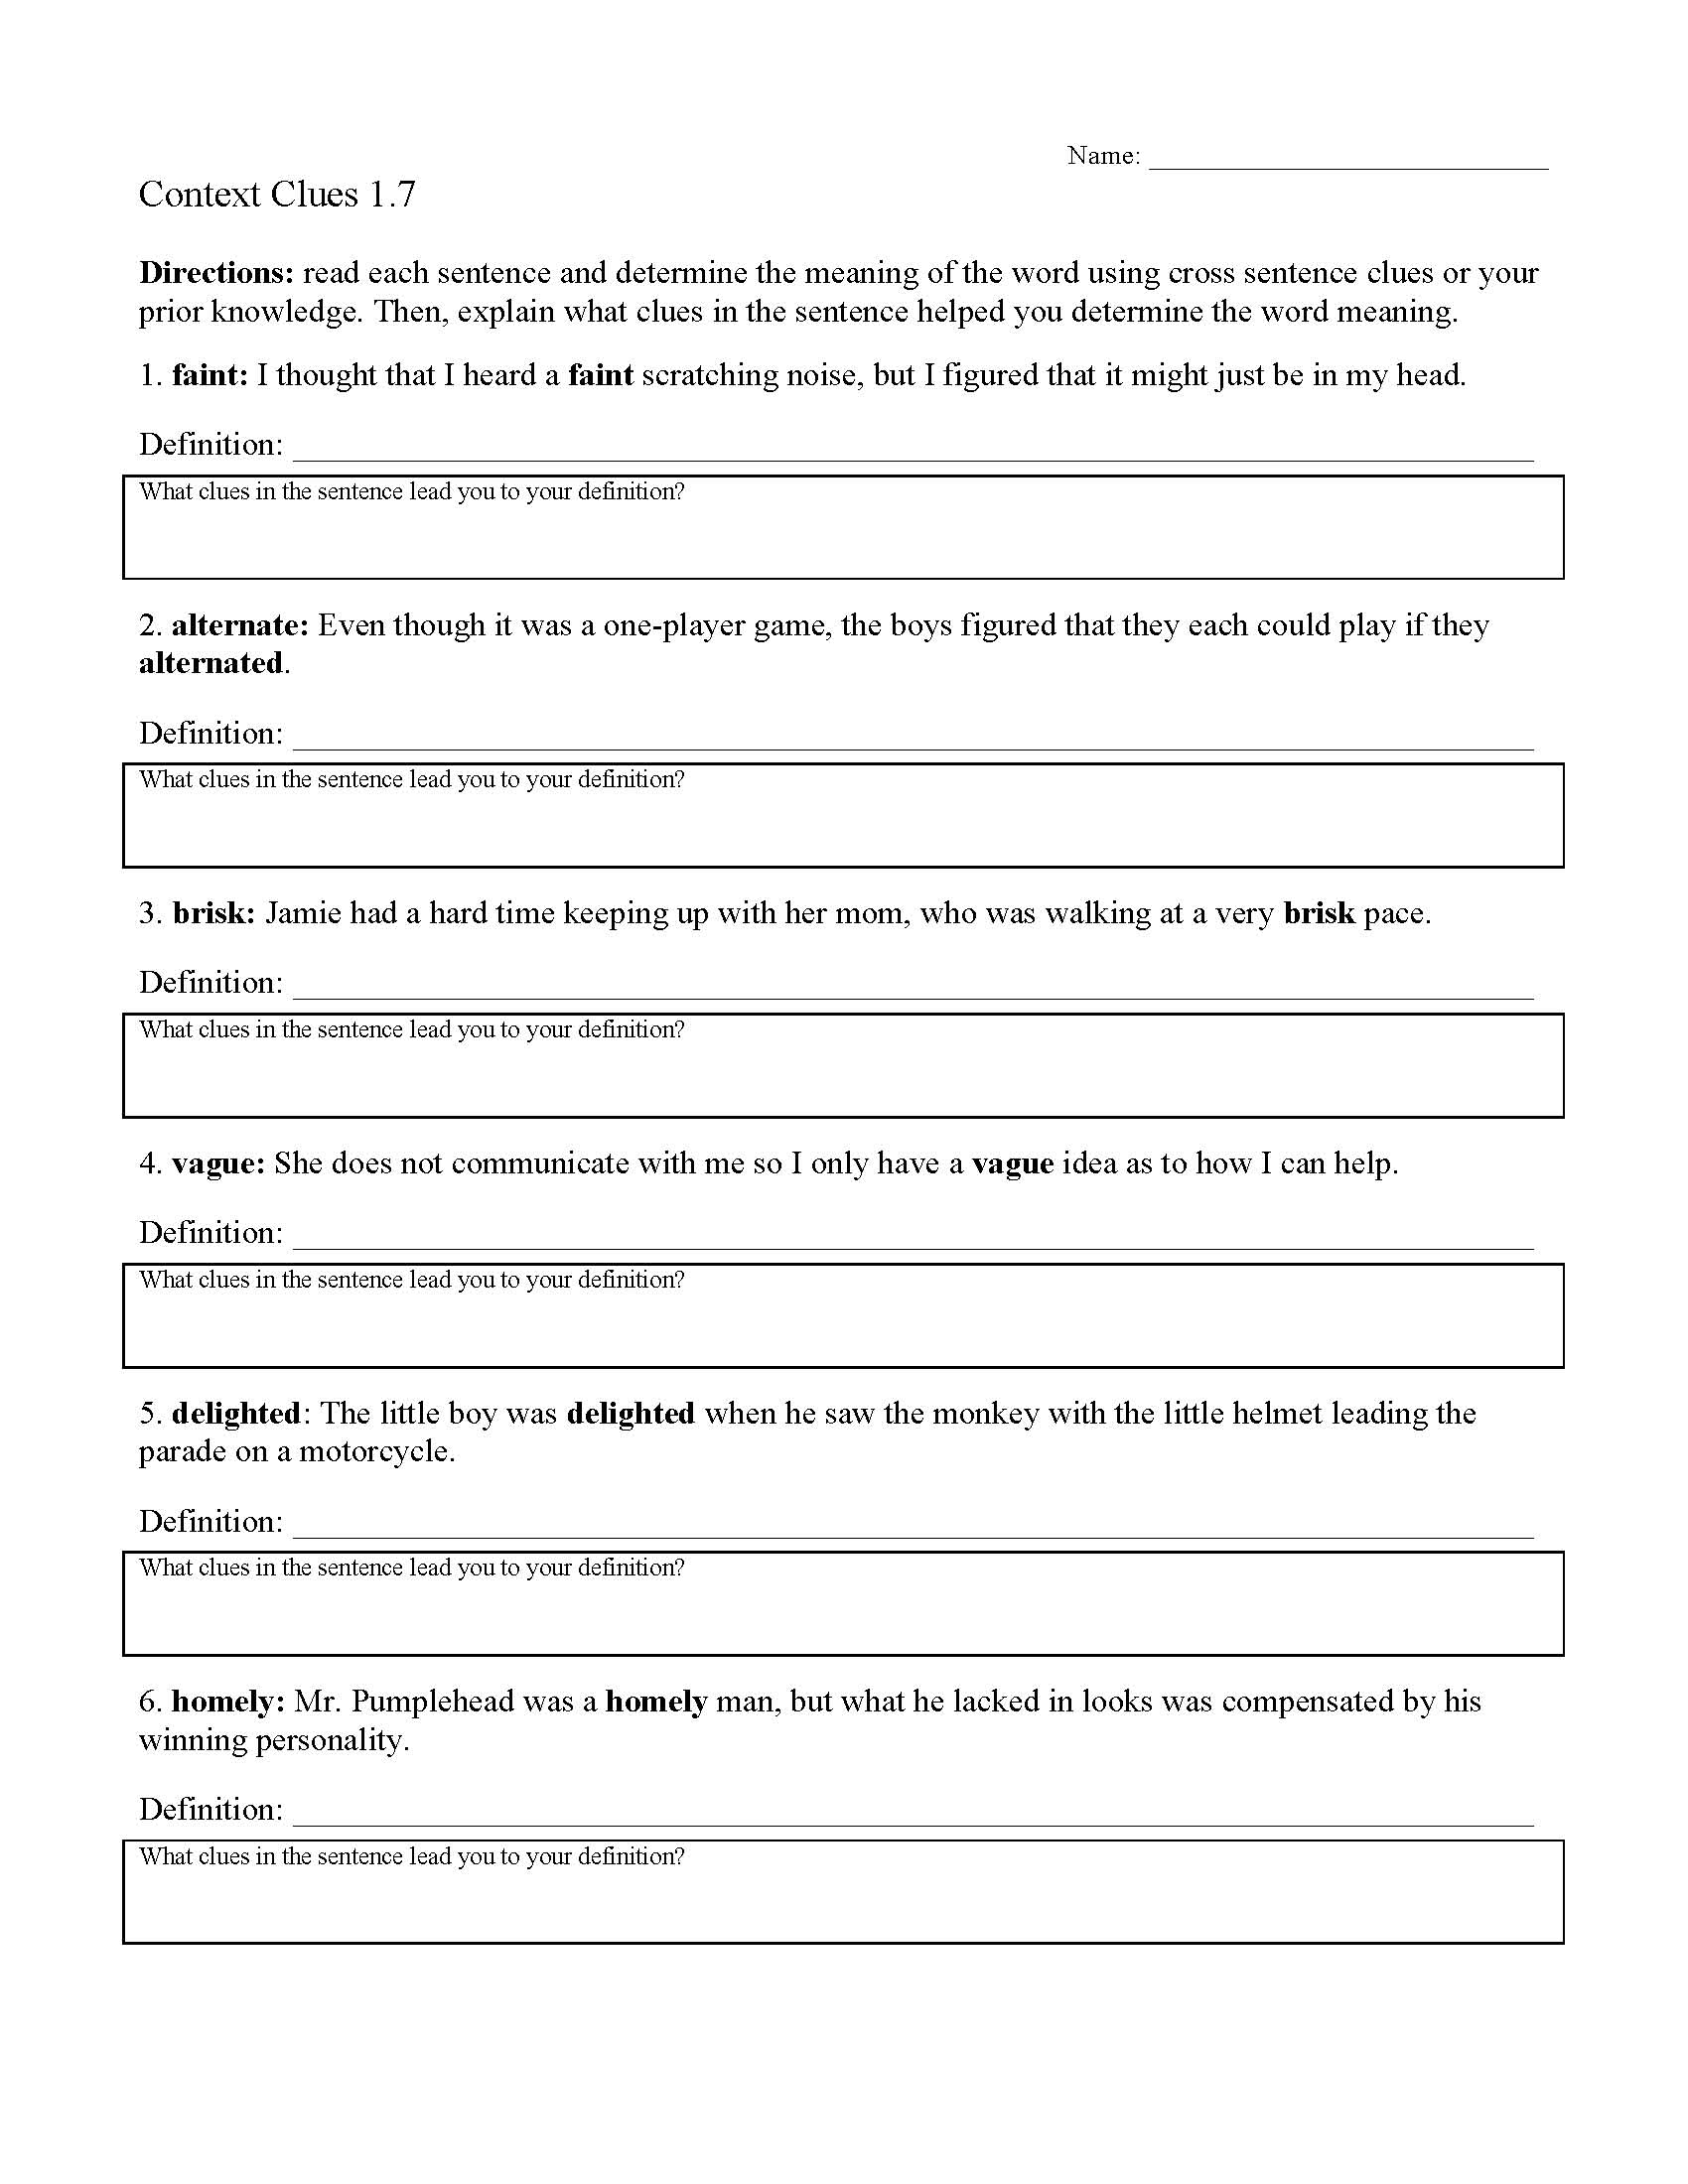 This is a preview image of Context Clues Worksheet 1.7. Click on it to enlarge it or view the source file.